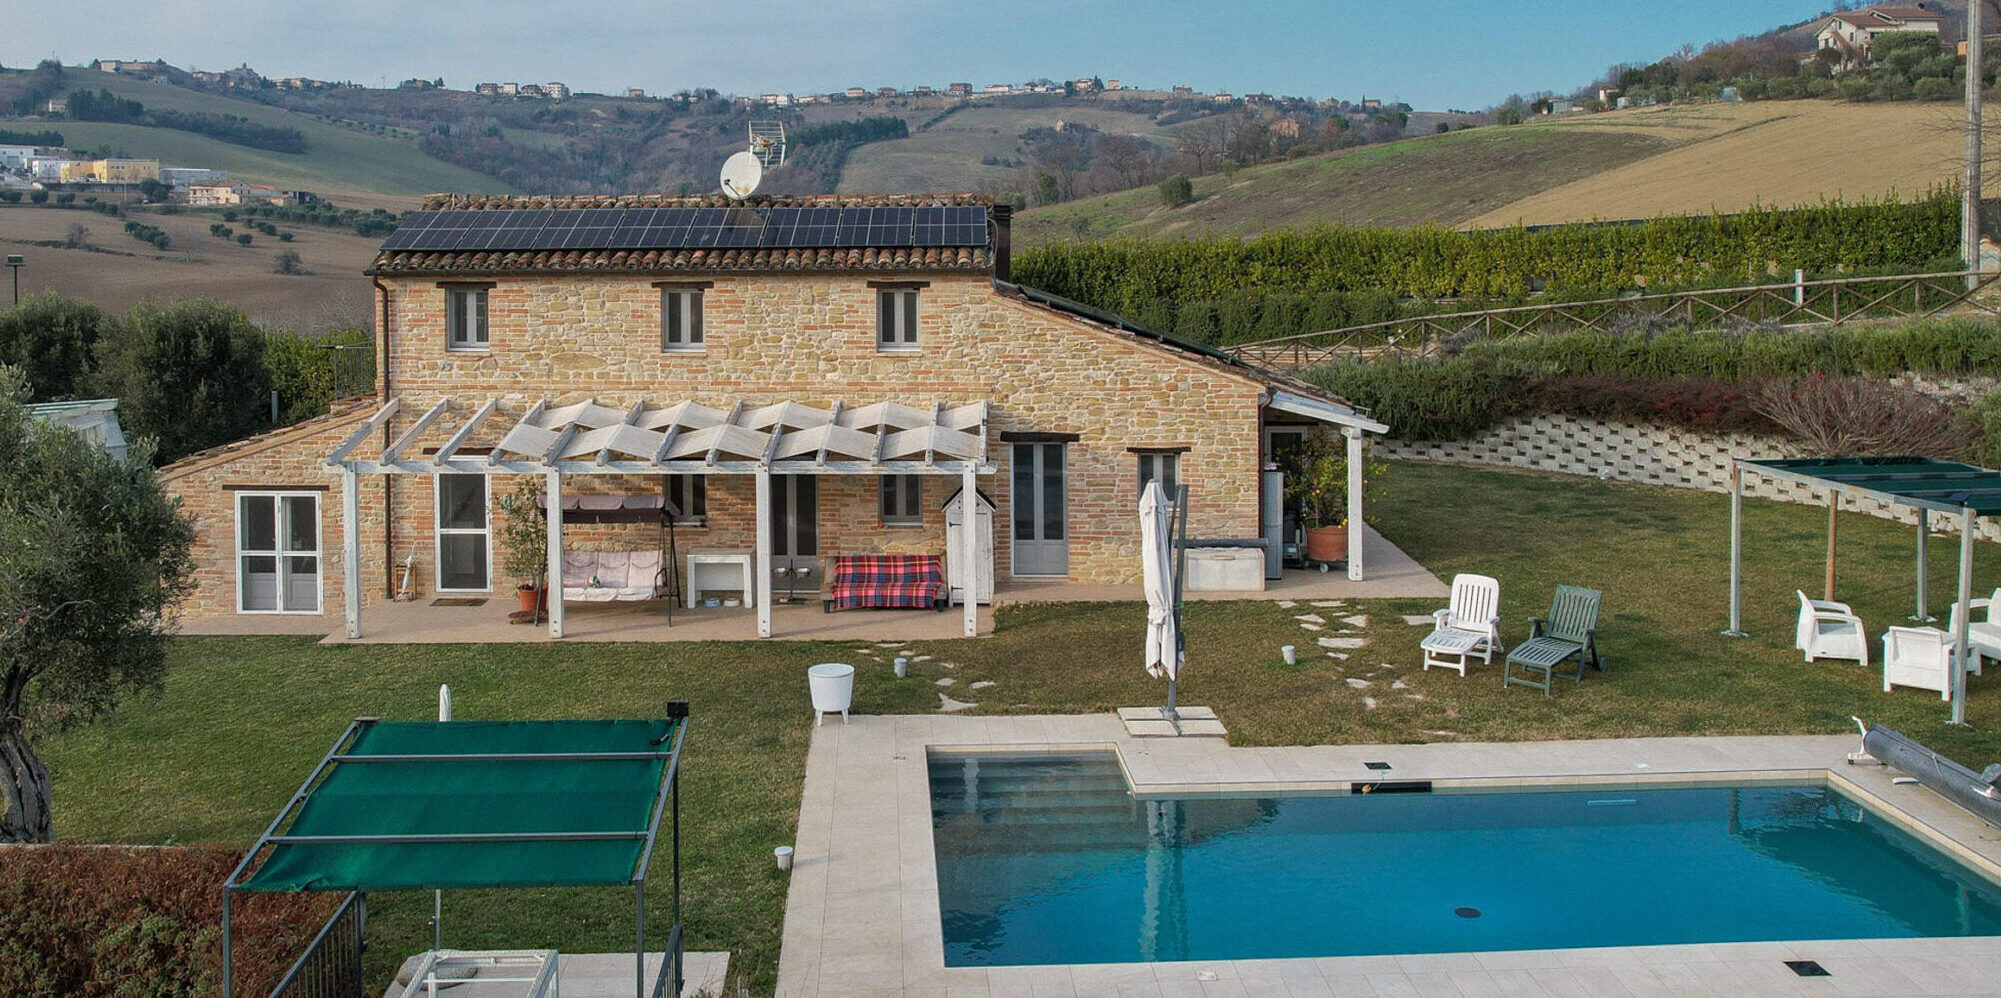 Casale Dante – Just finished country house with heated pool